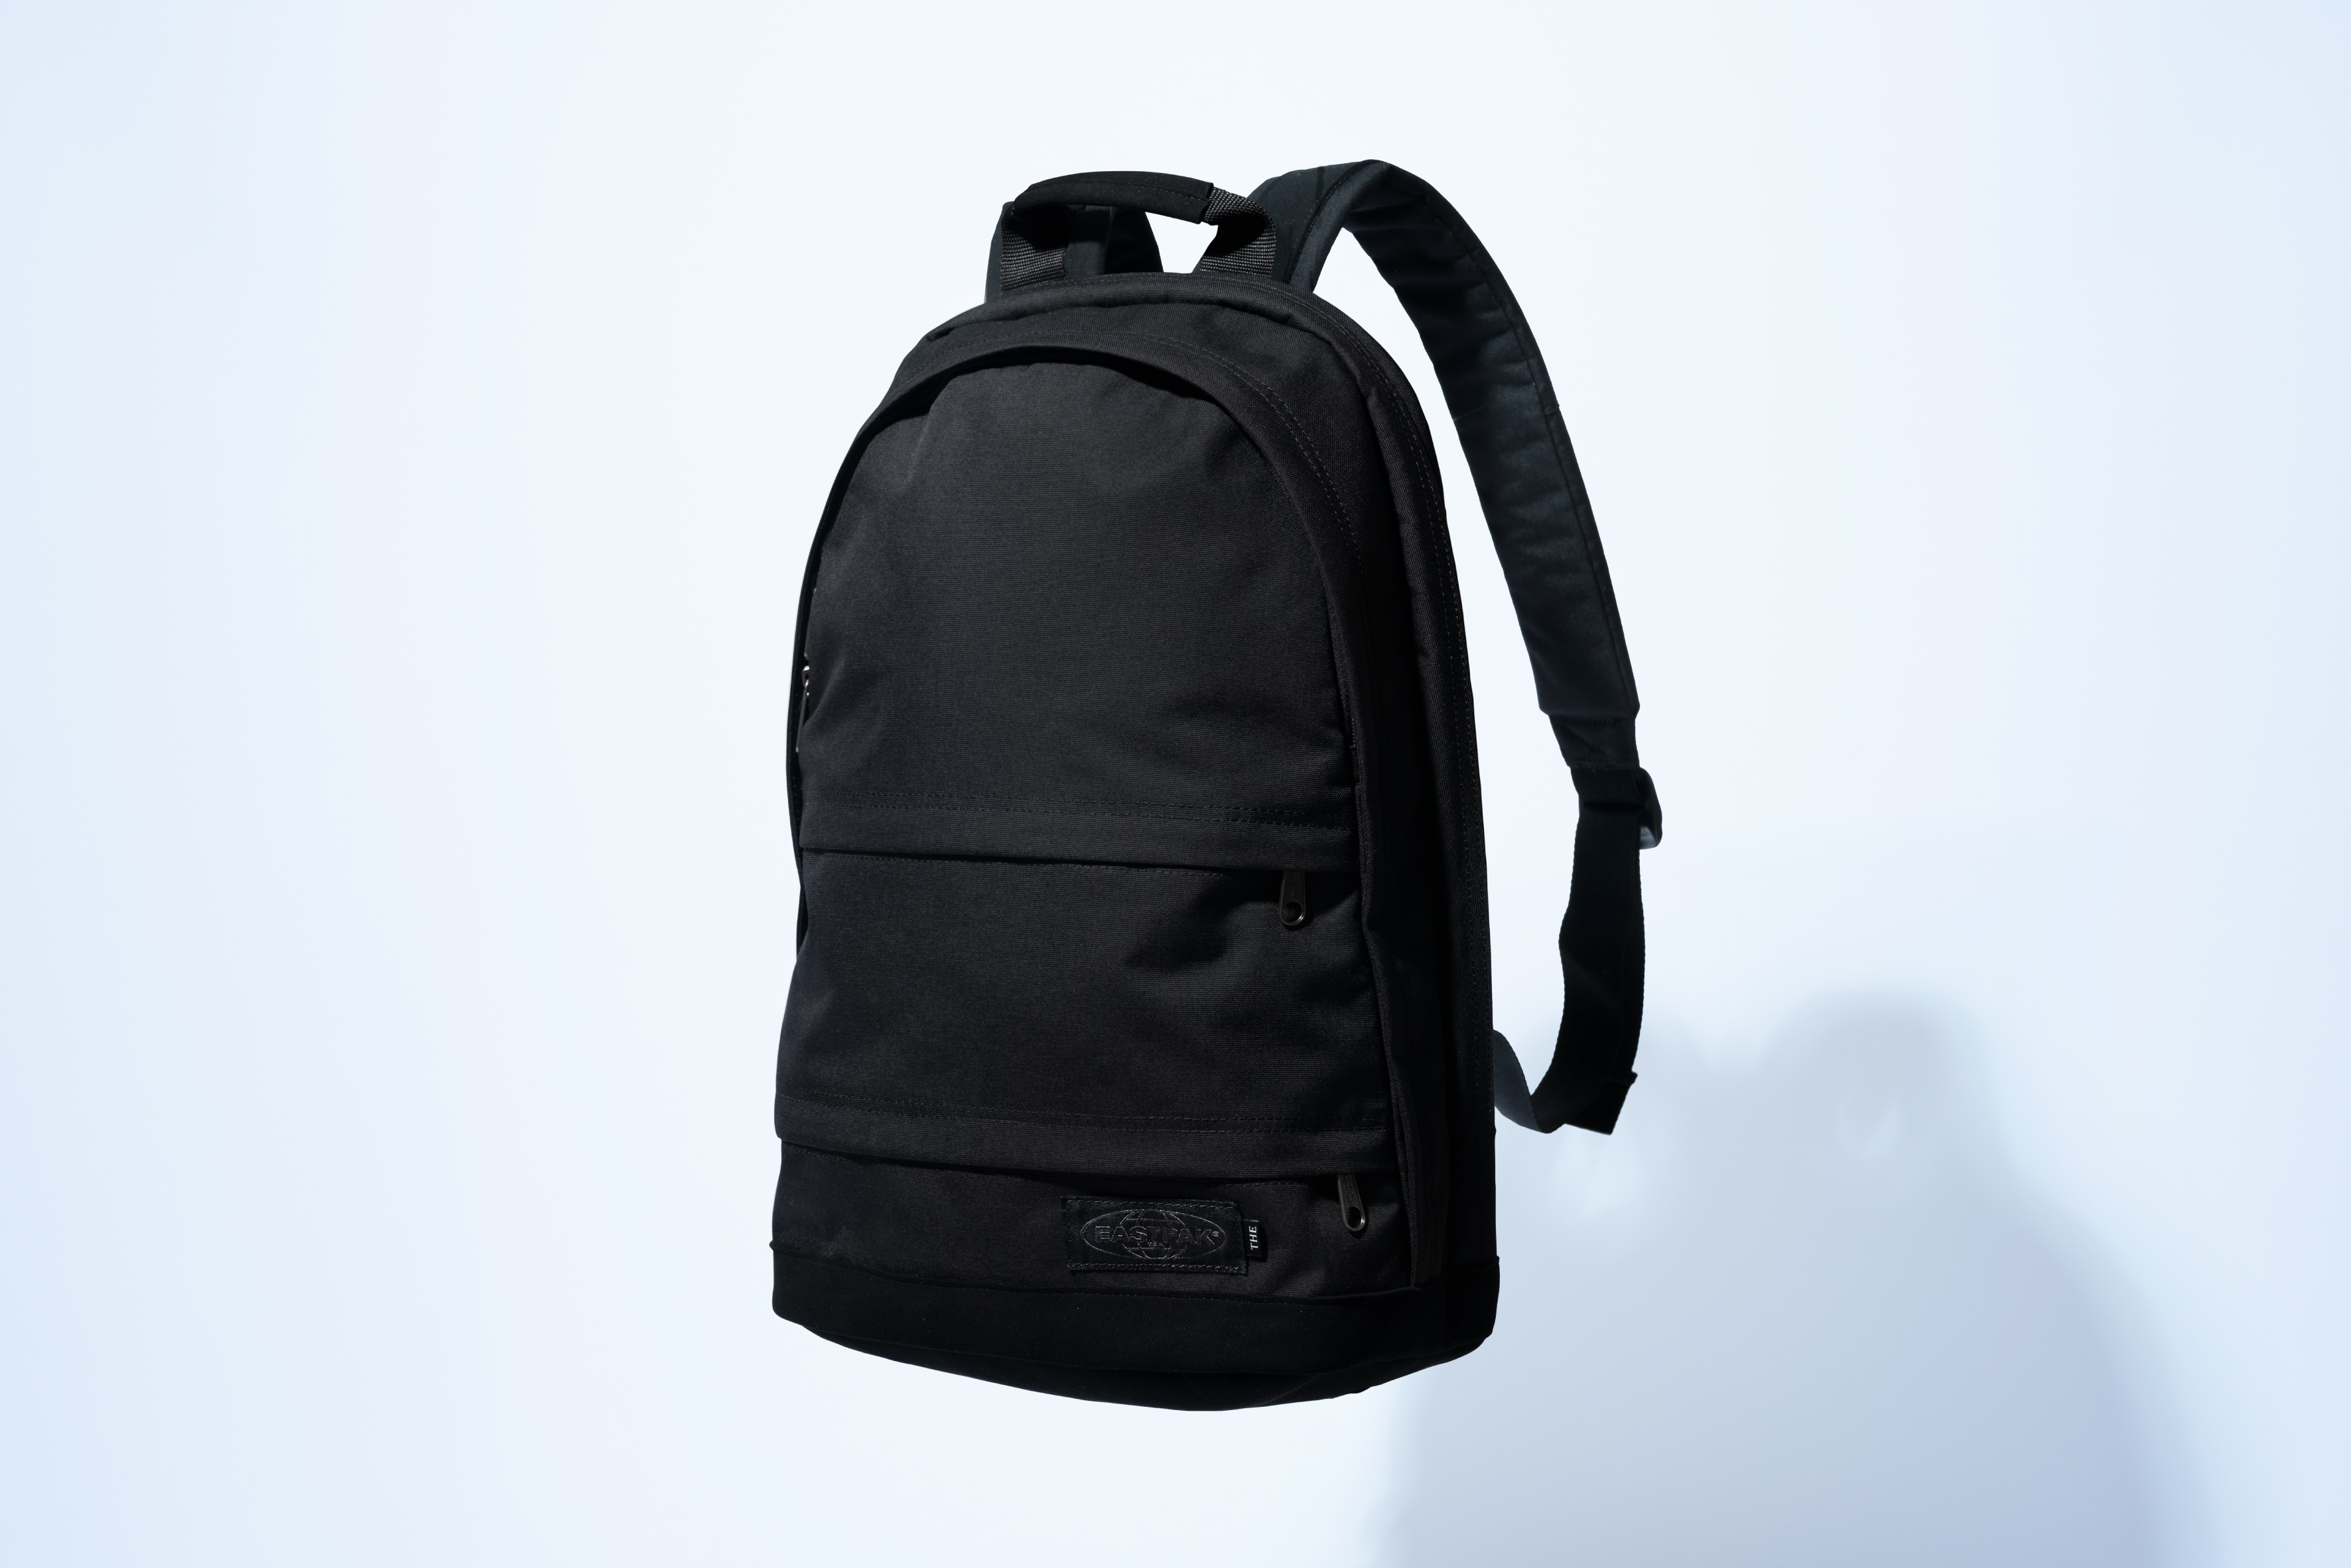 THE News Release:【新商品】THE DAY PACK by EASTPAK®発売｜ザの